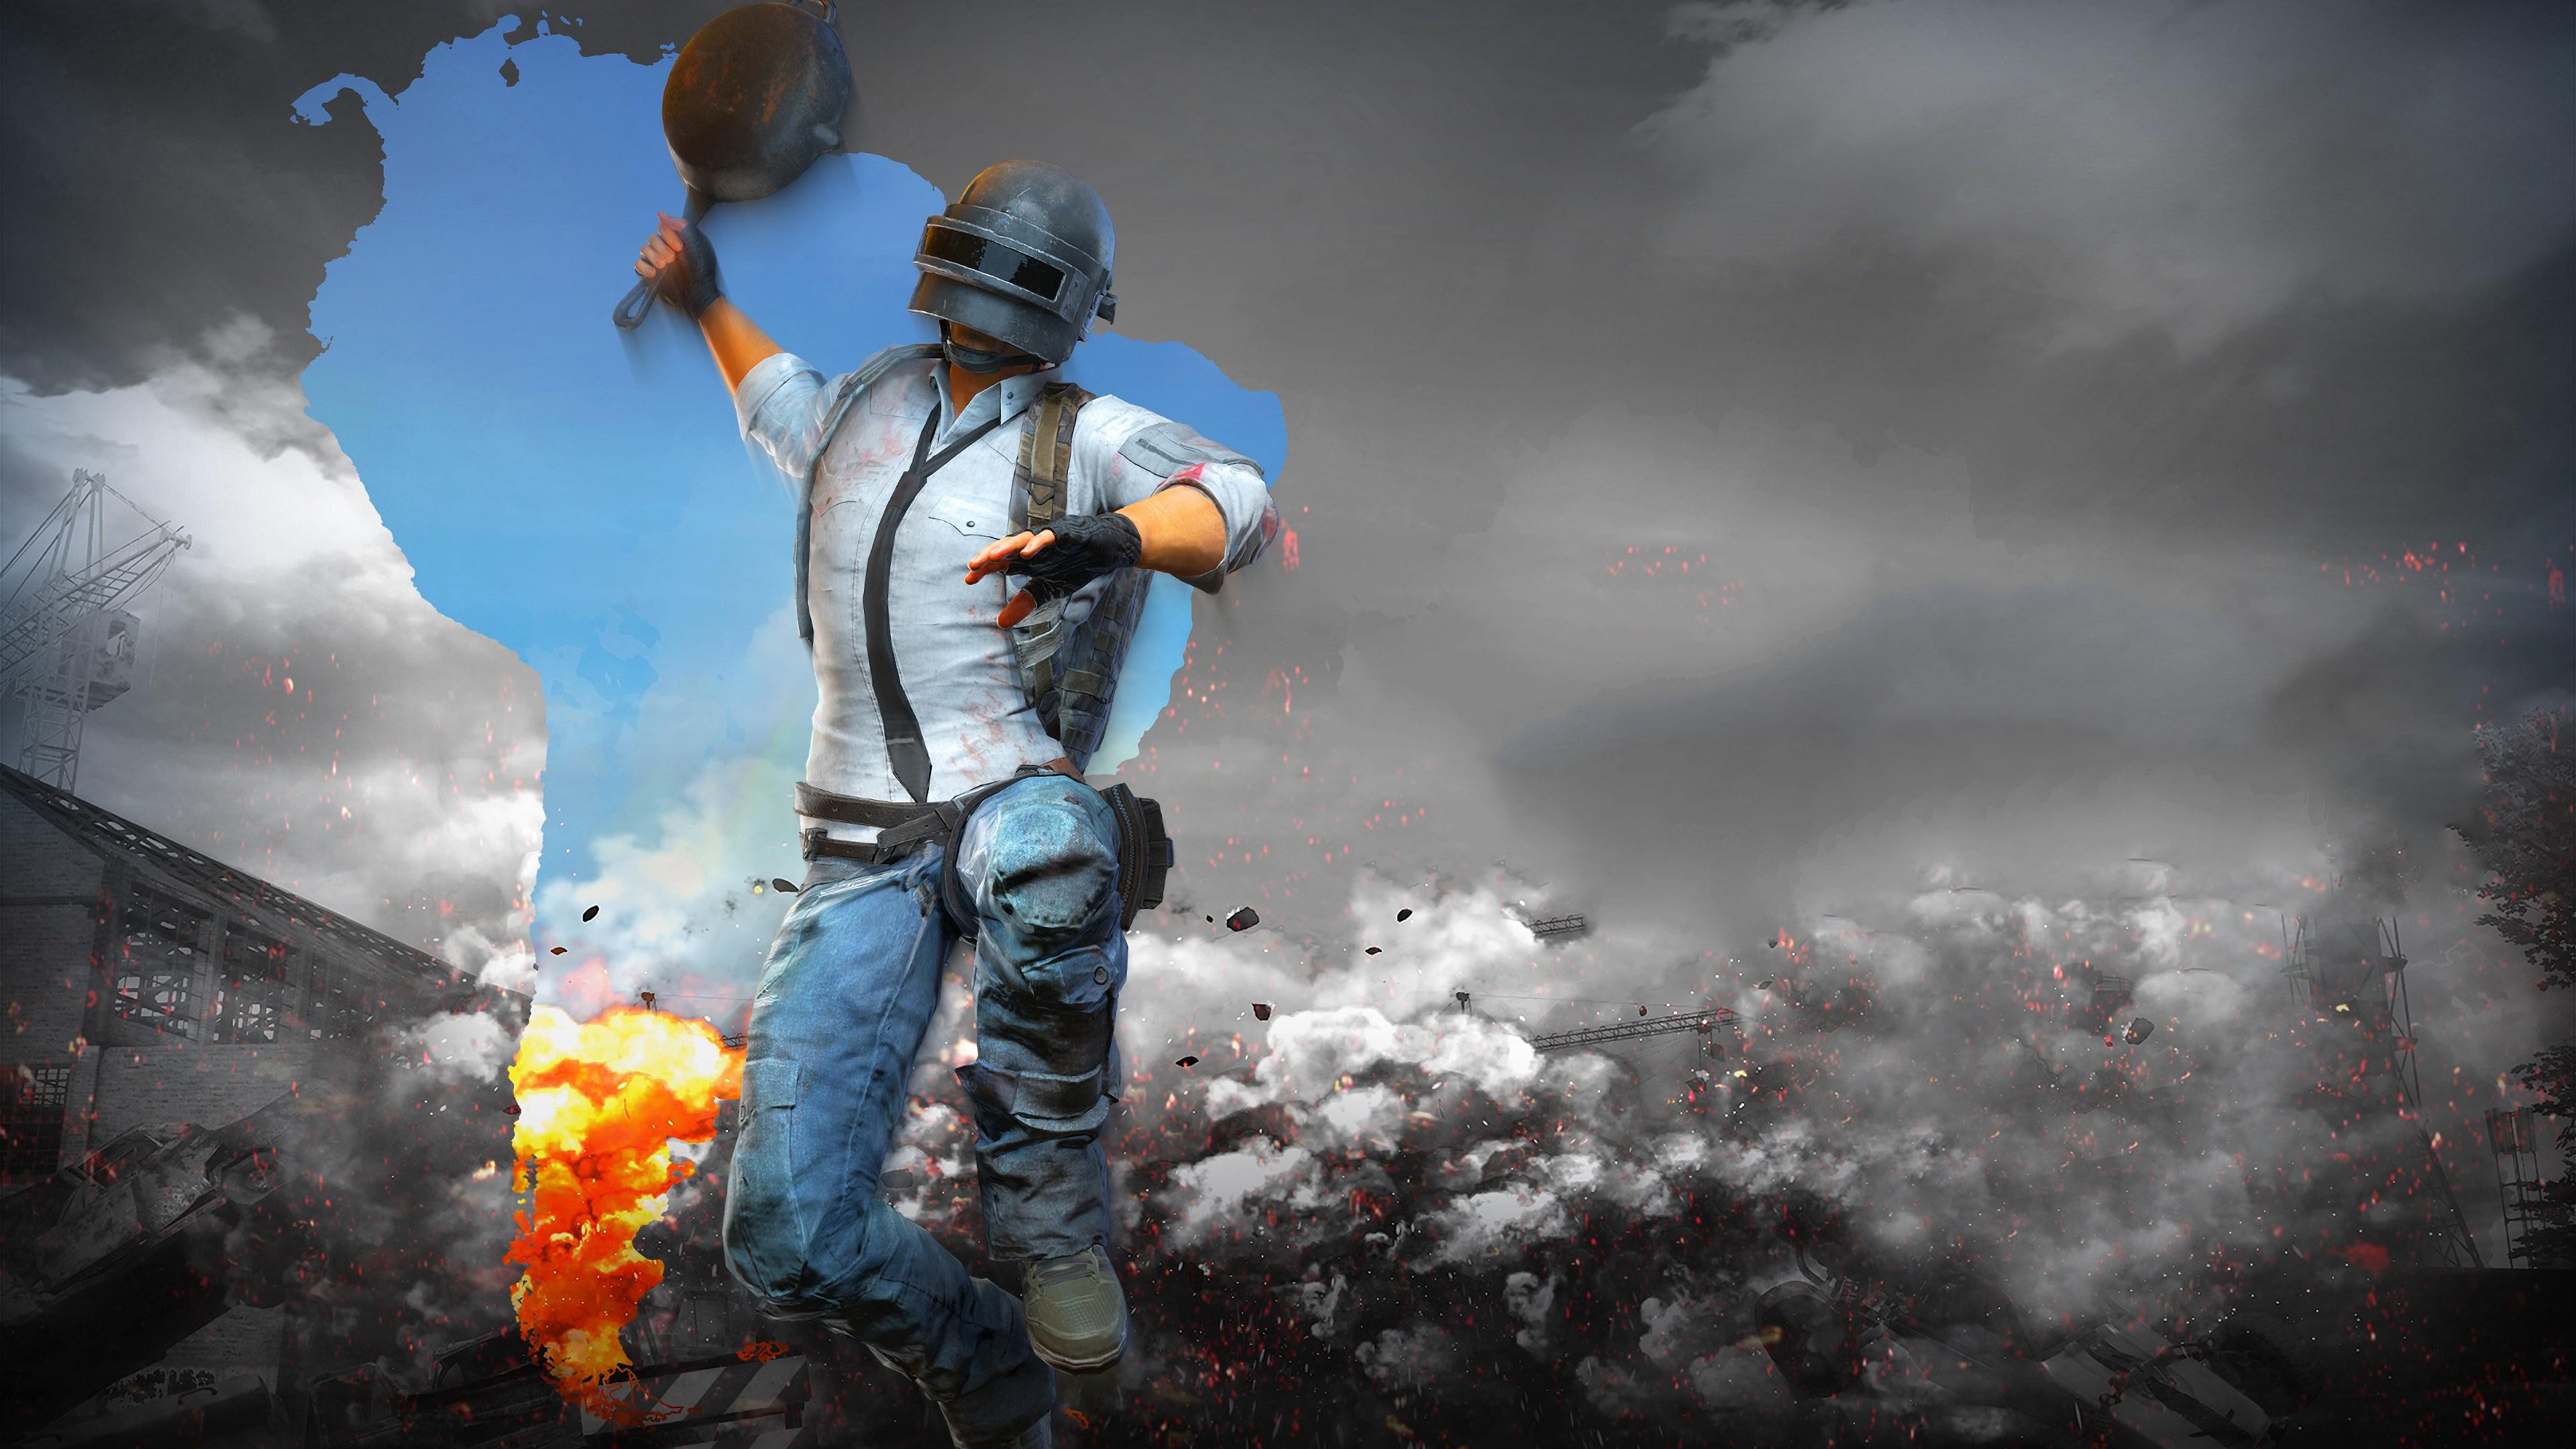 PUBG Wallpaper in Full HD for PC and Phone